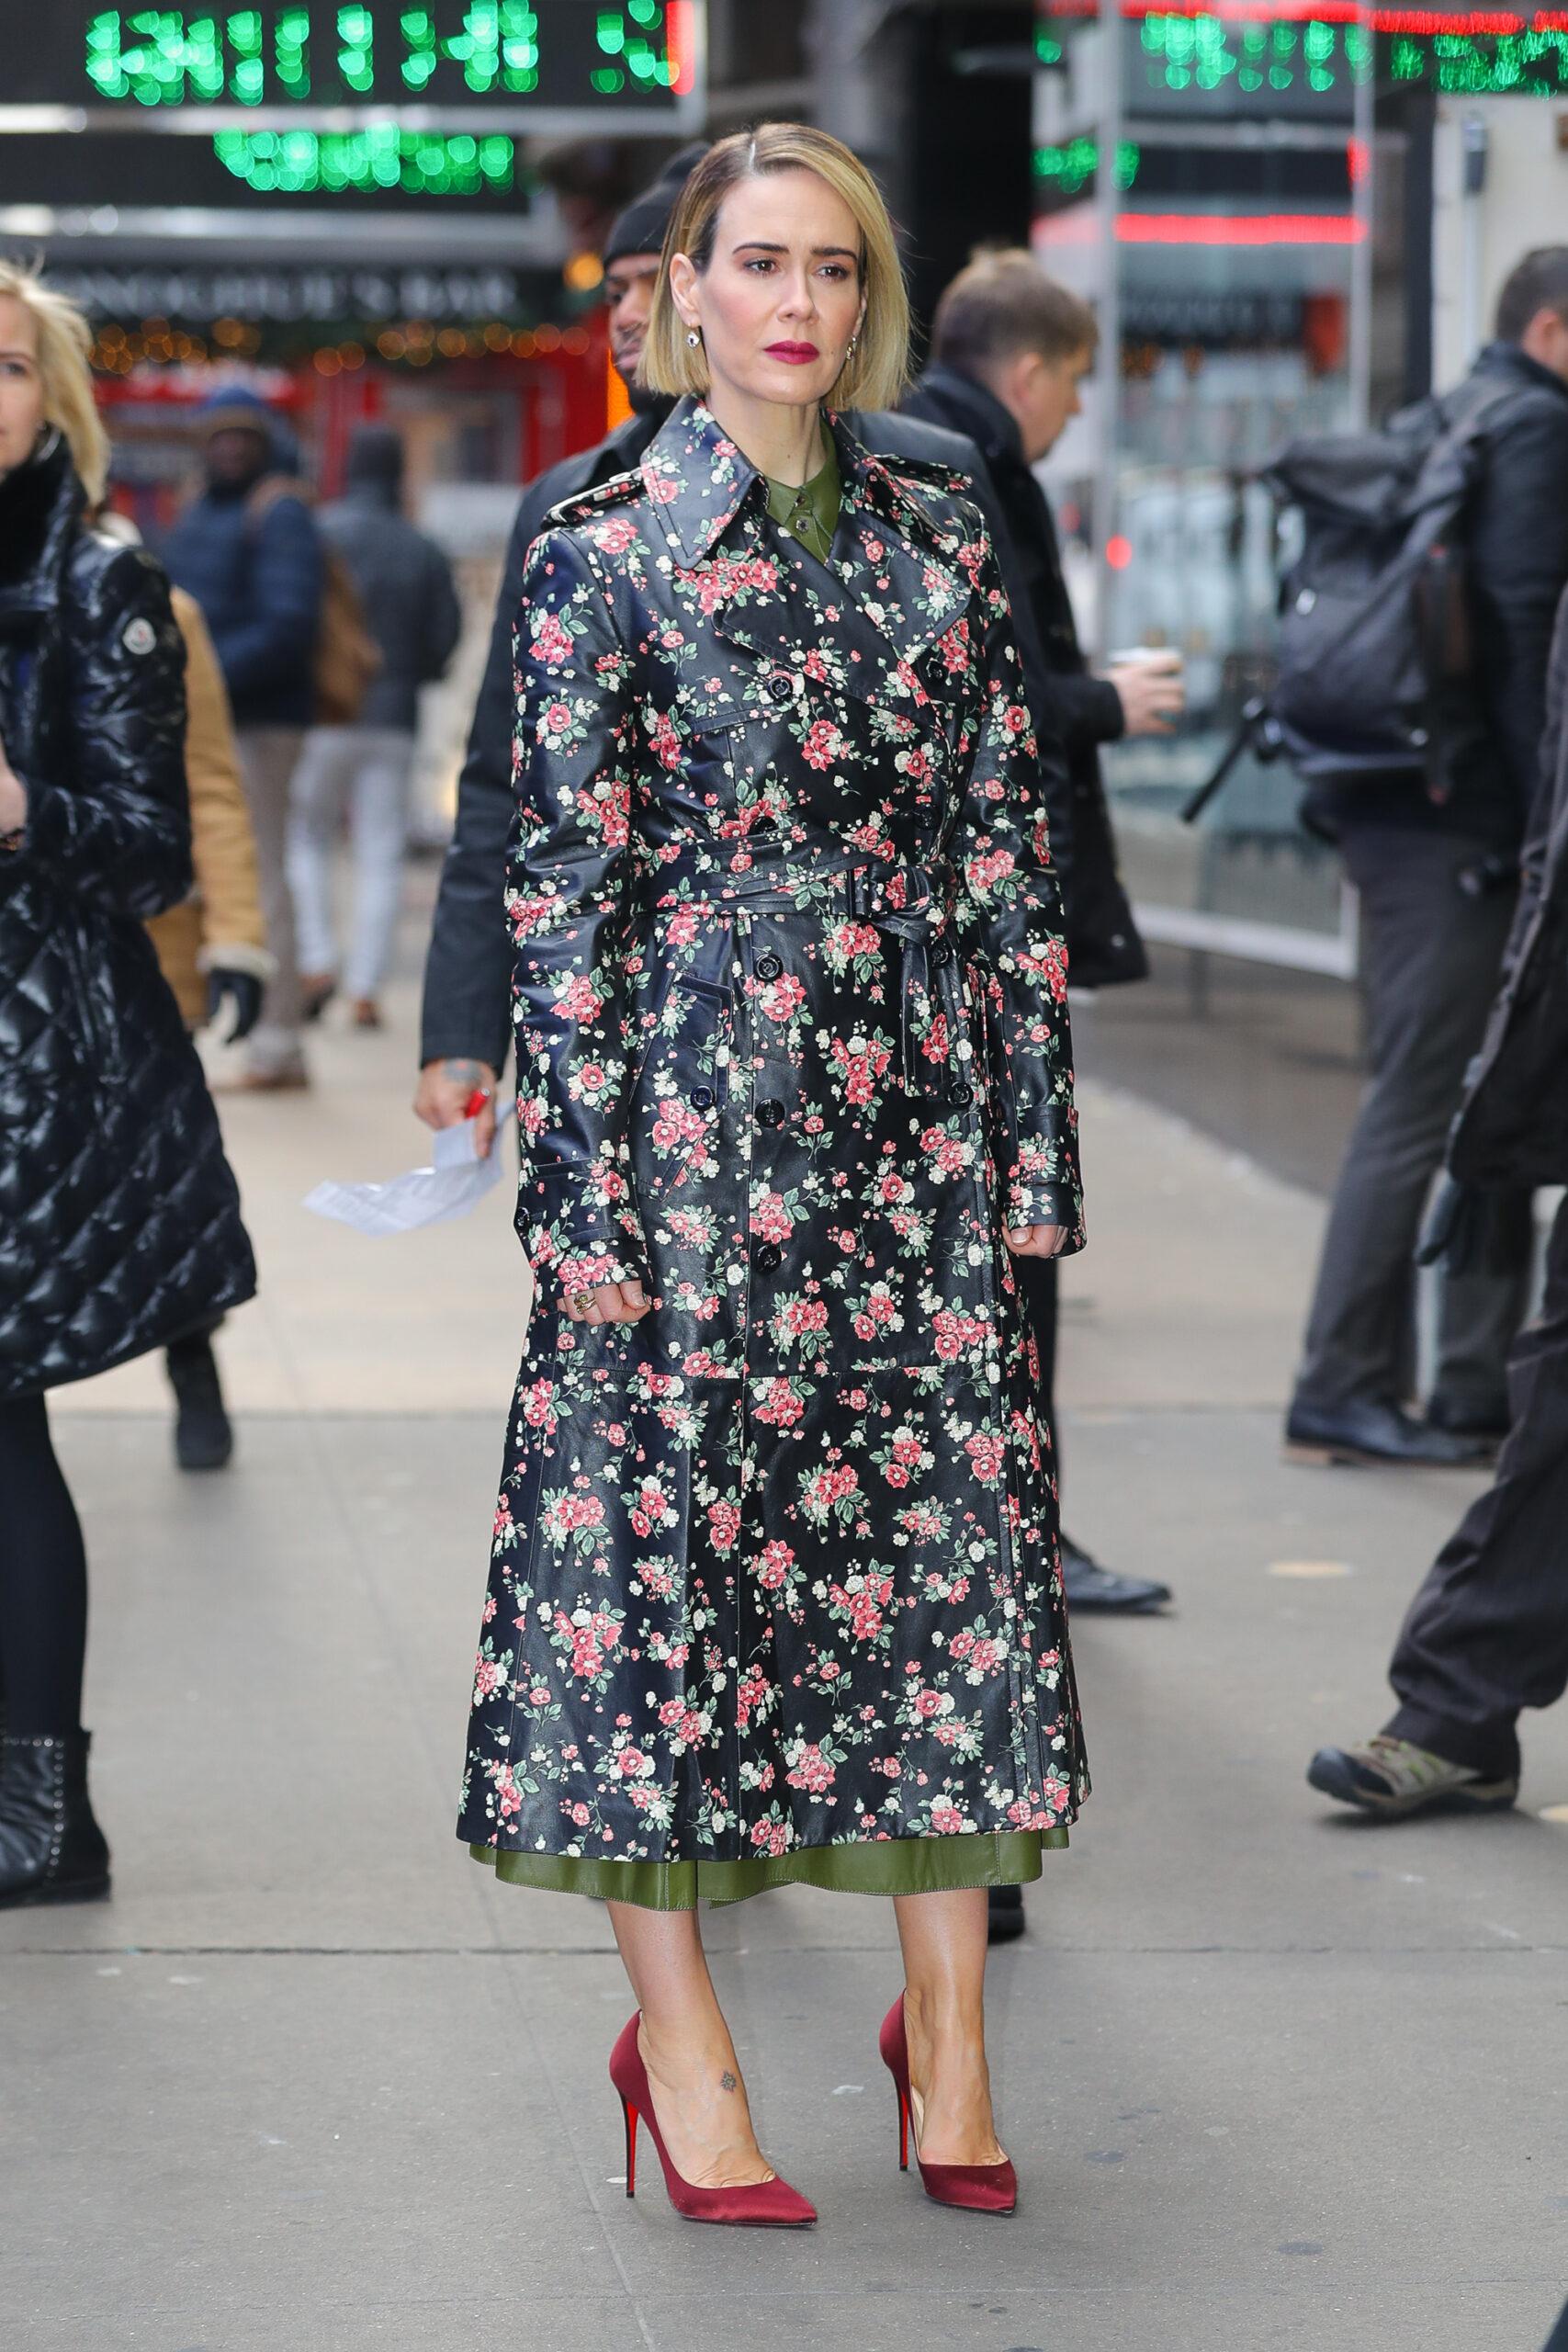 Sarah Paulson wore a floral Michael Kors Trench Coat while leaving the Good Morning America on Thursday Morning in NYC